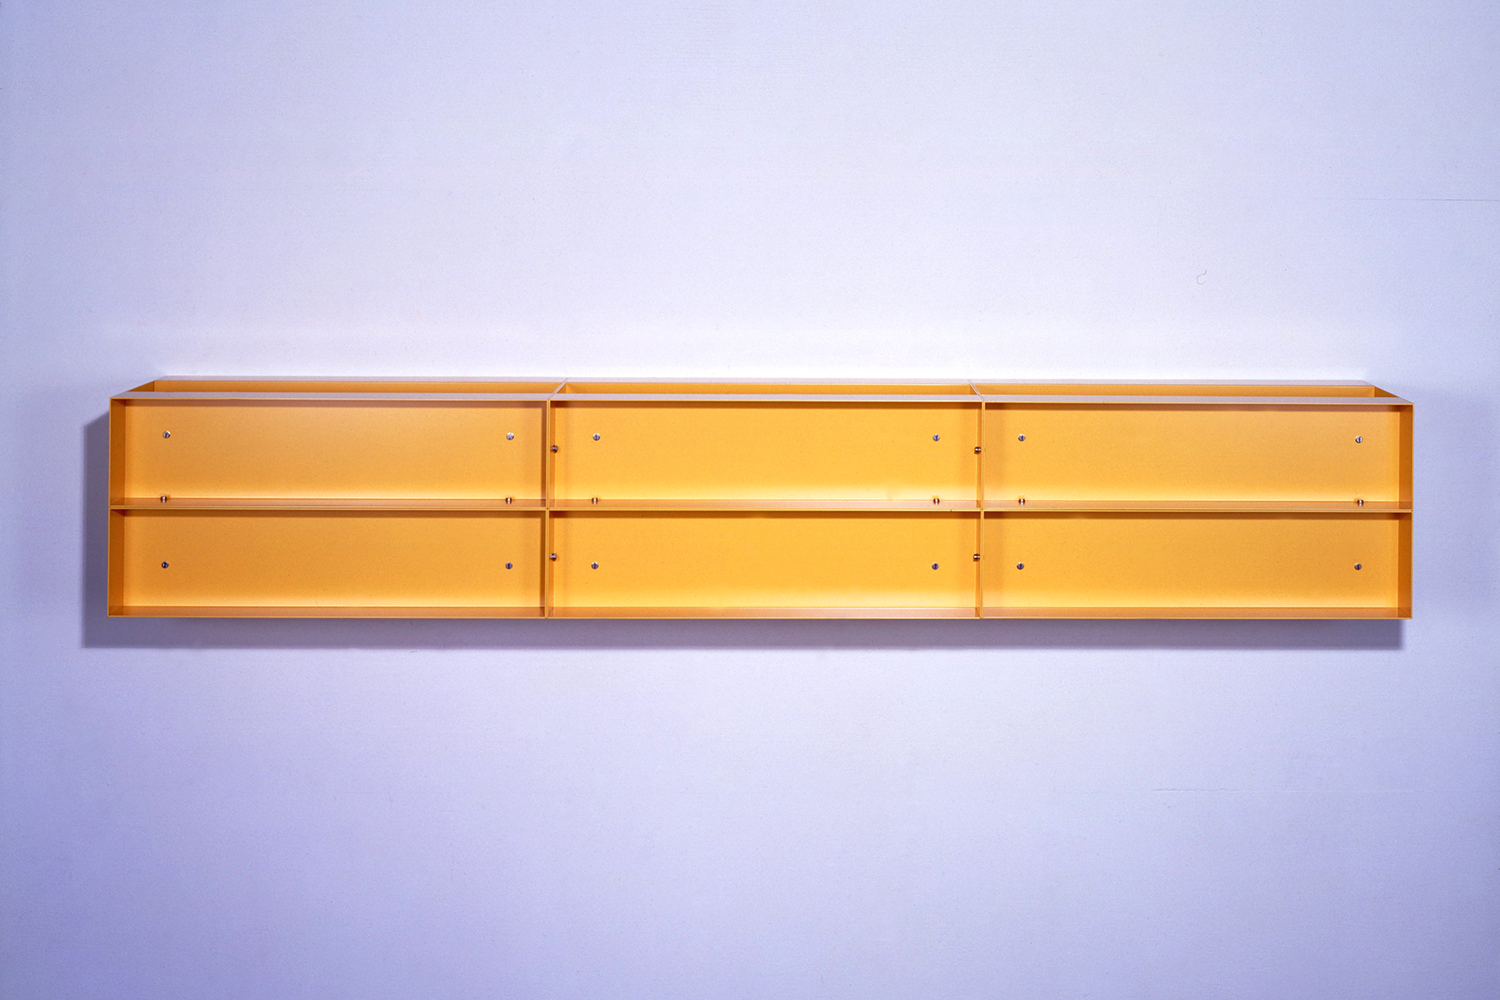 Untitled Yellow 1989｜painted aluminum wall sculpture｜30 x 180 x 30 cm